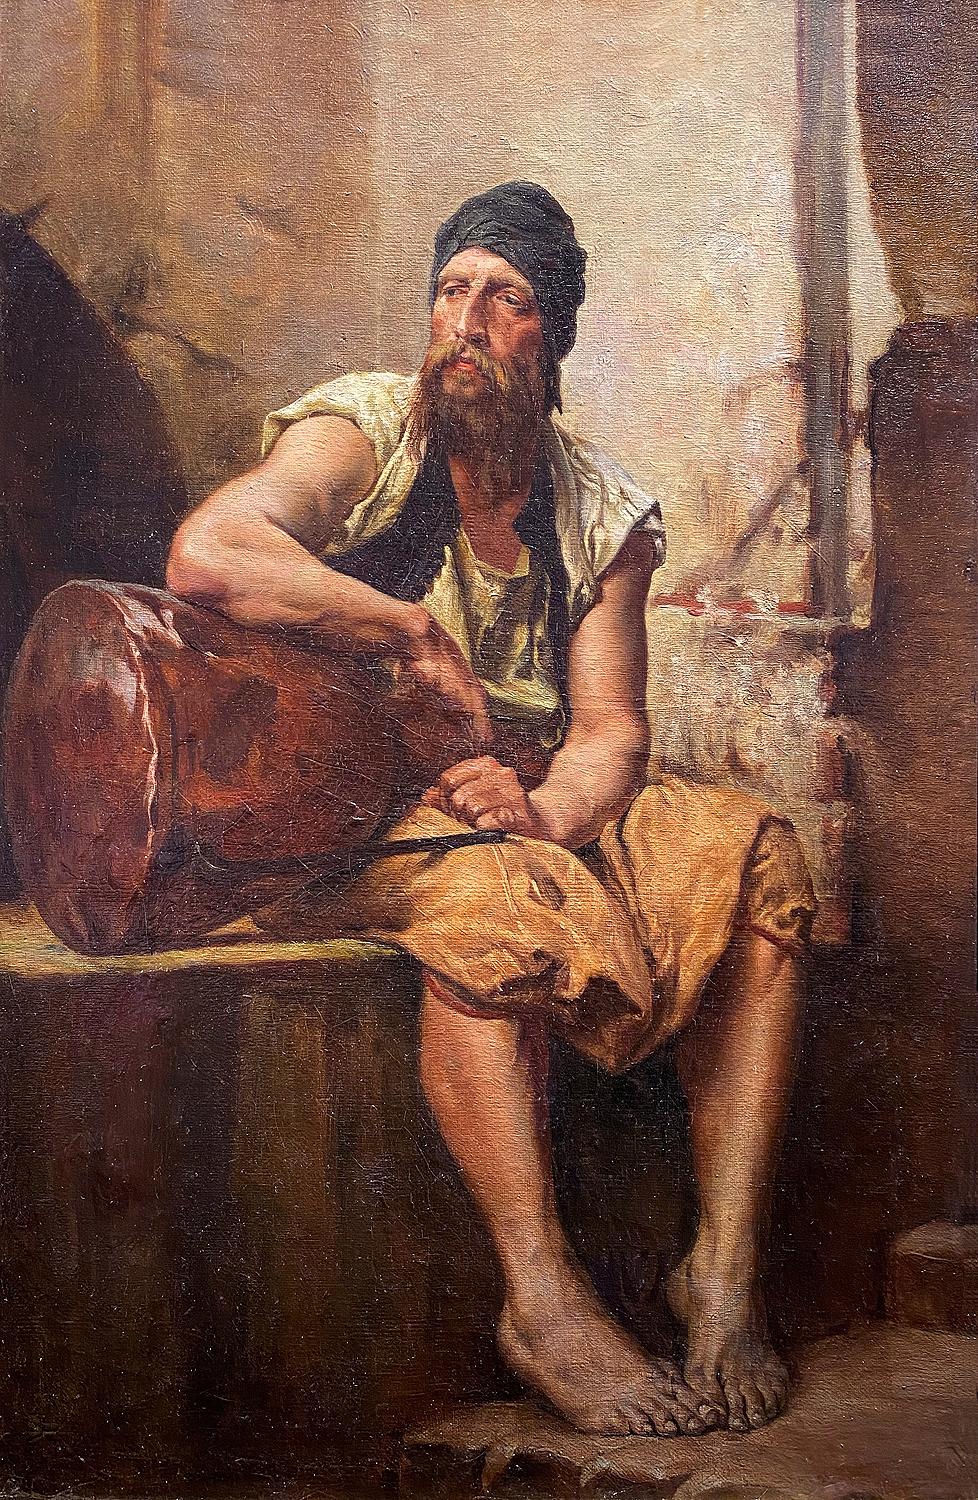 Raphael von Ambros Figurative Painting - The Water Carrier, 19th Century Orientalist Oil Painting